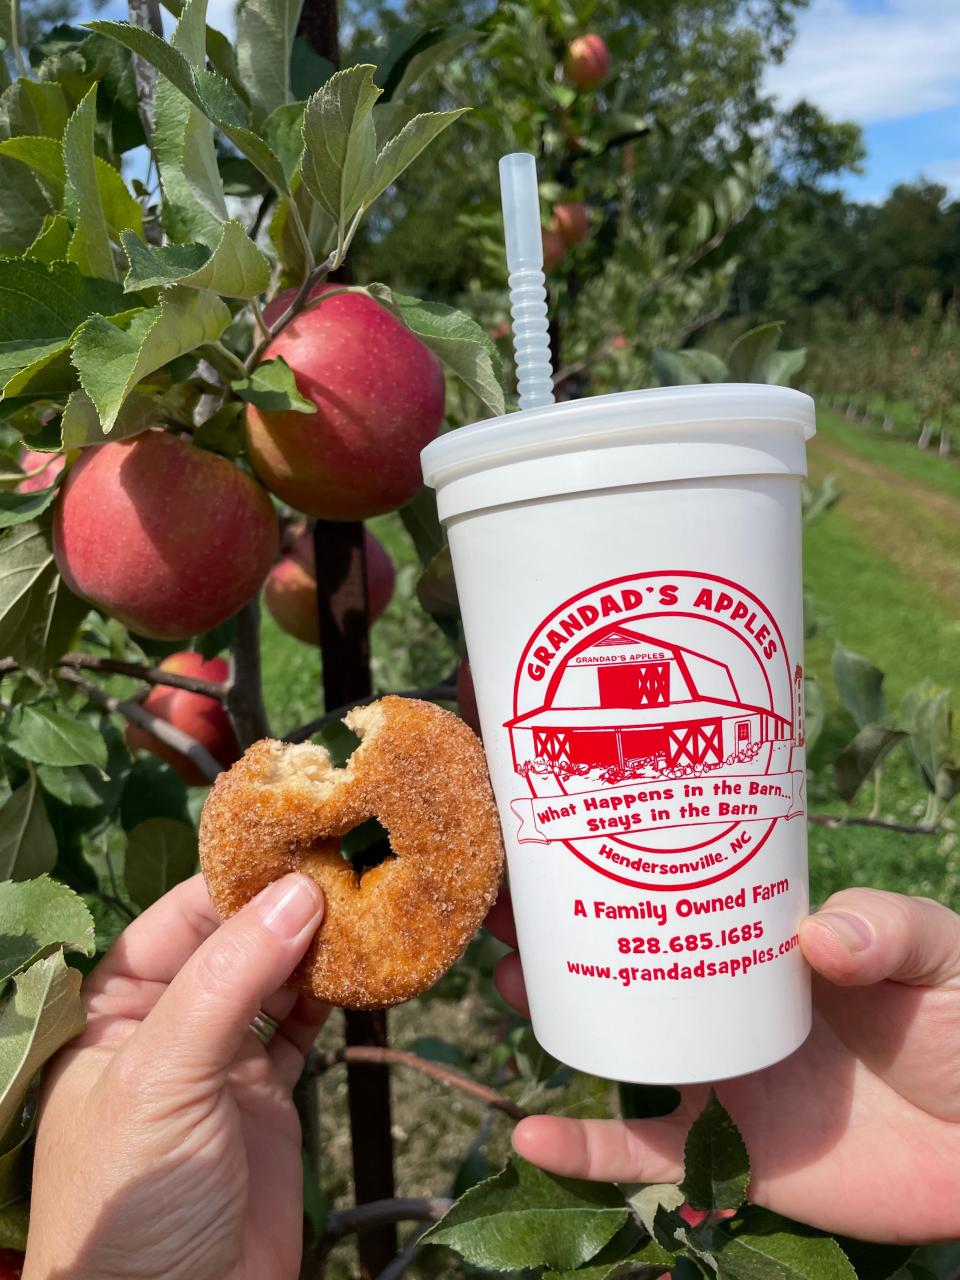 Grandad's Apples offers apple cider, donuts, baked goods, jams and more at its orchard in Henderson County.